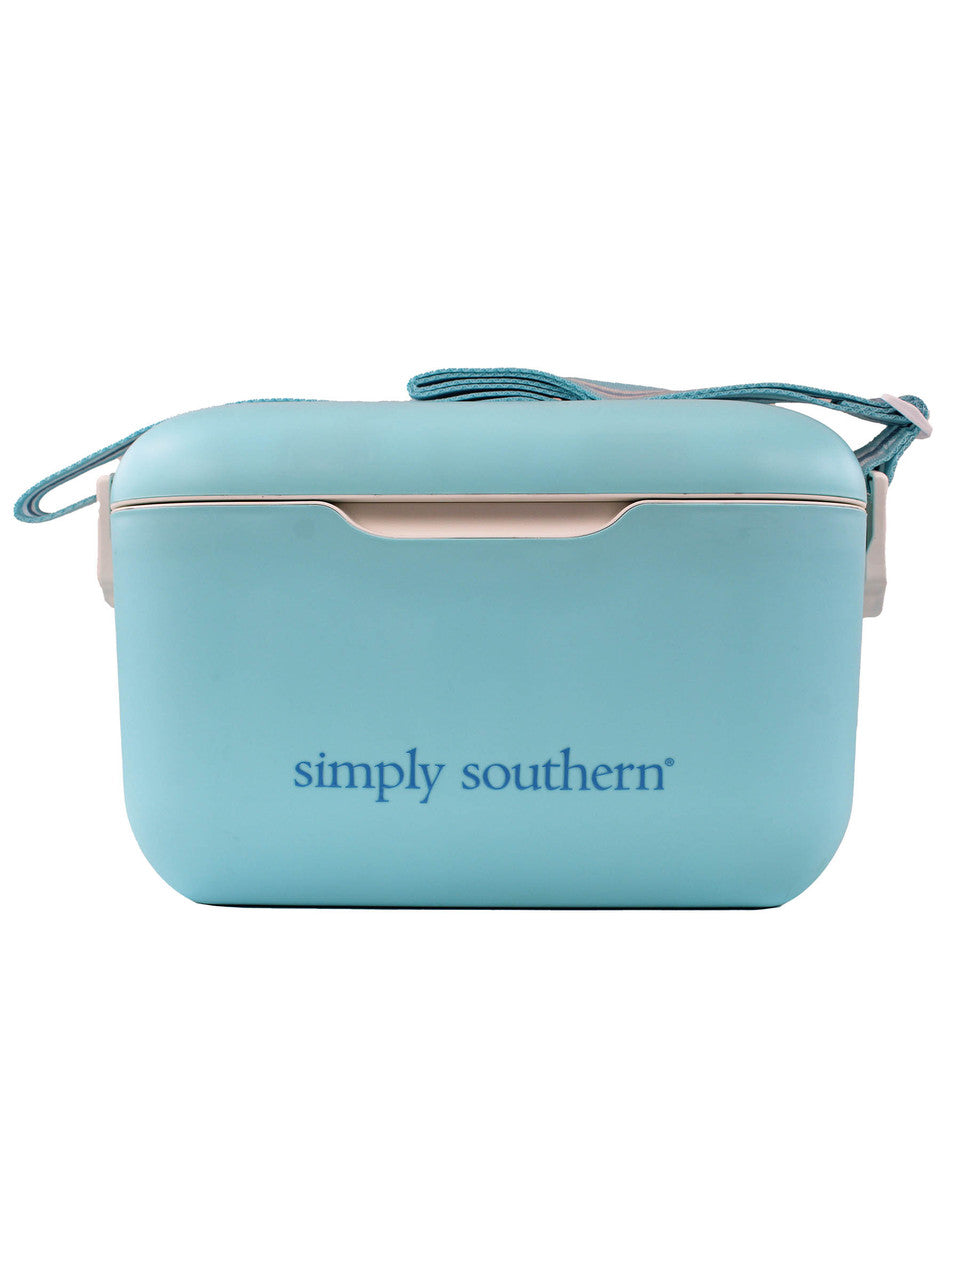 Simply Southern Vintage Style Cooler 21qt